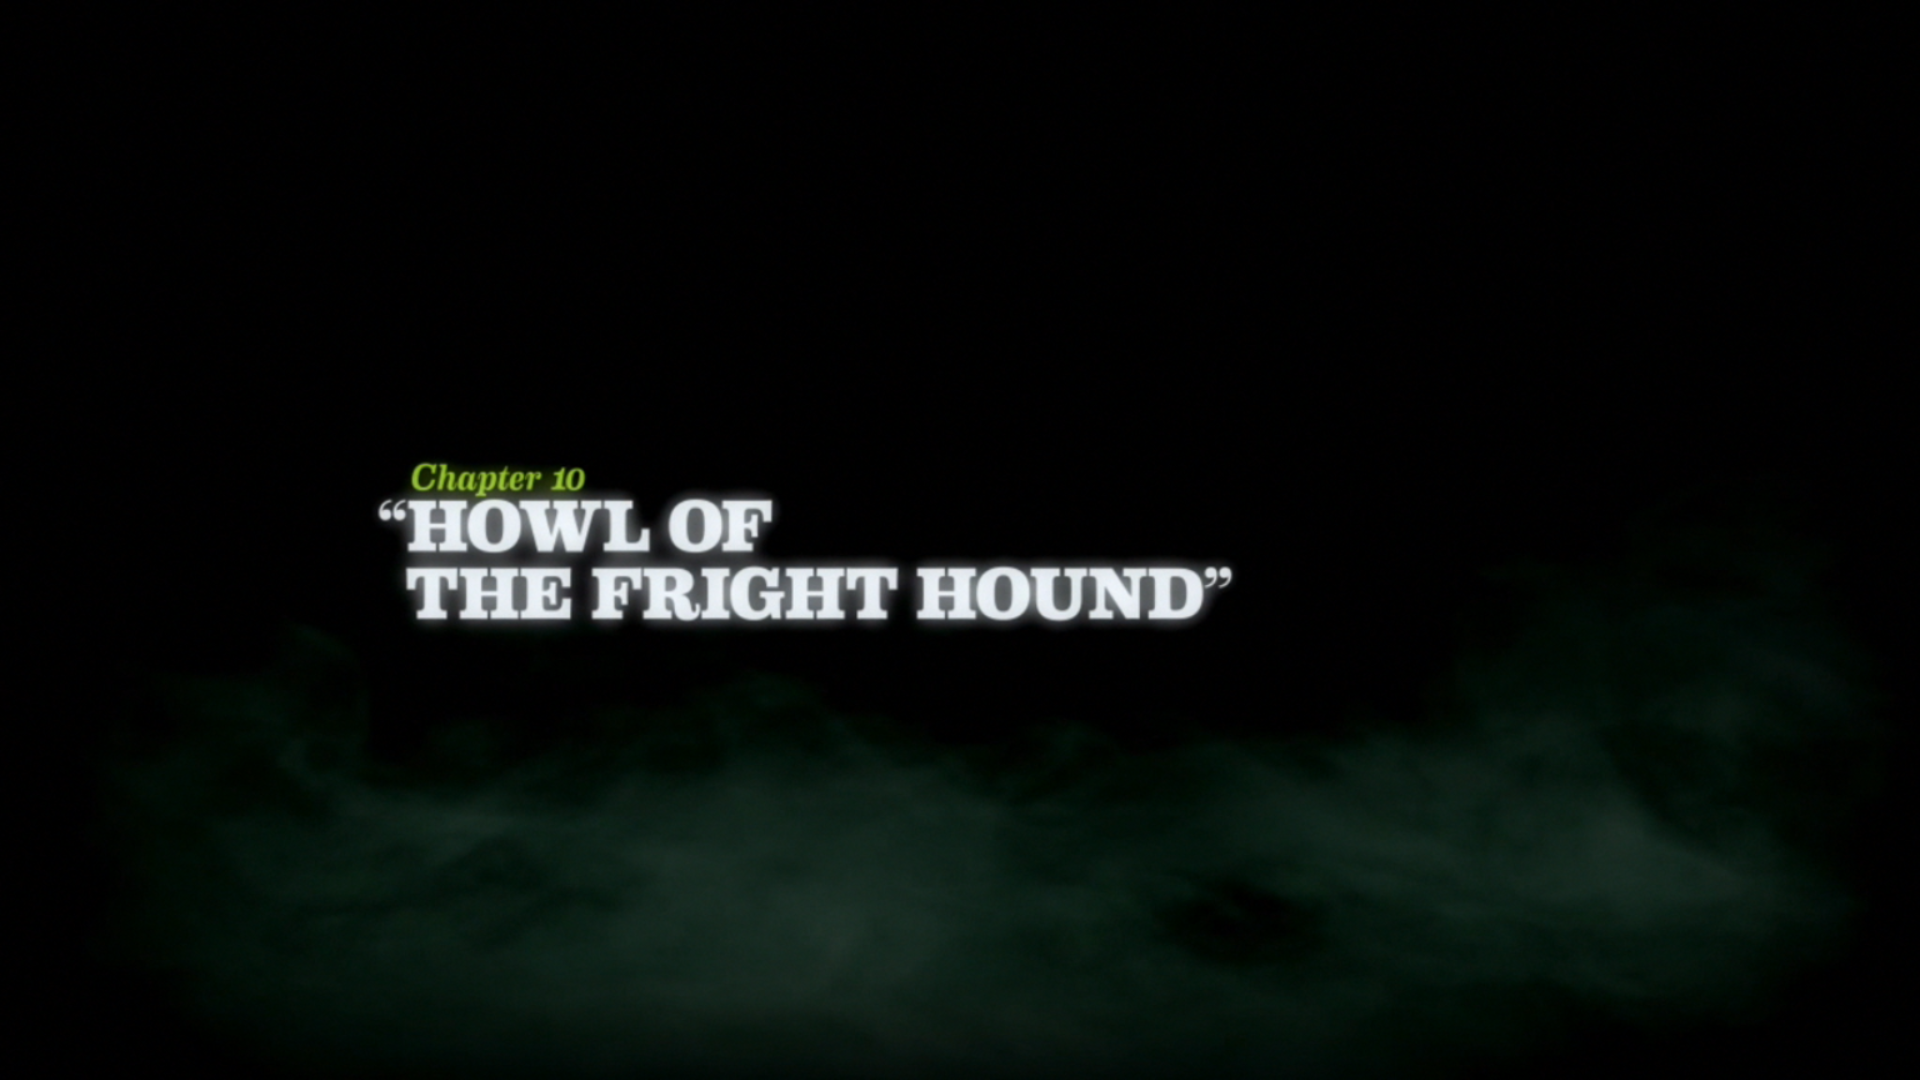 Howl_of_the_Fright_Hound_title_card